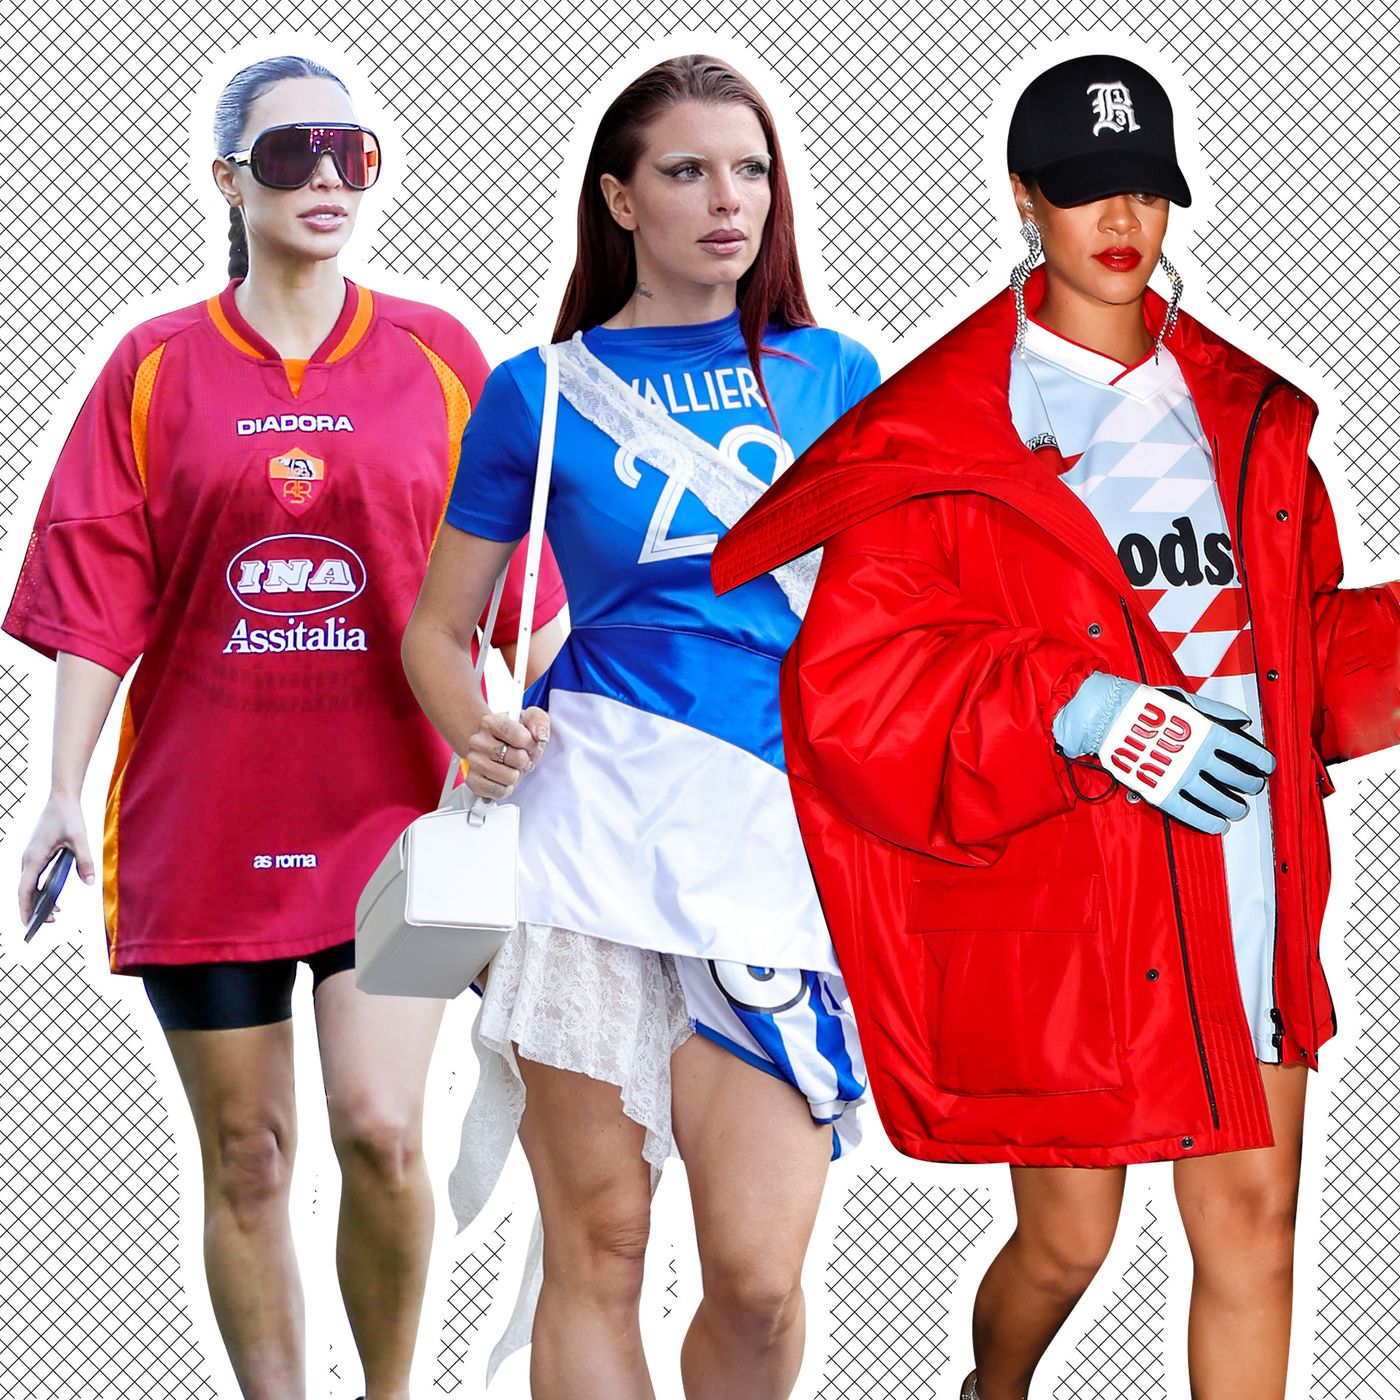 How to Style a Jersey, According to Fashion Stylists